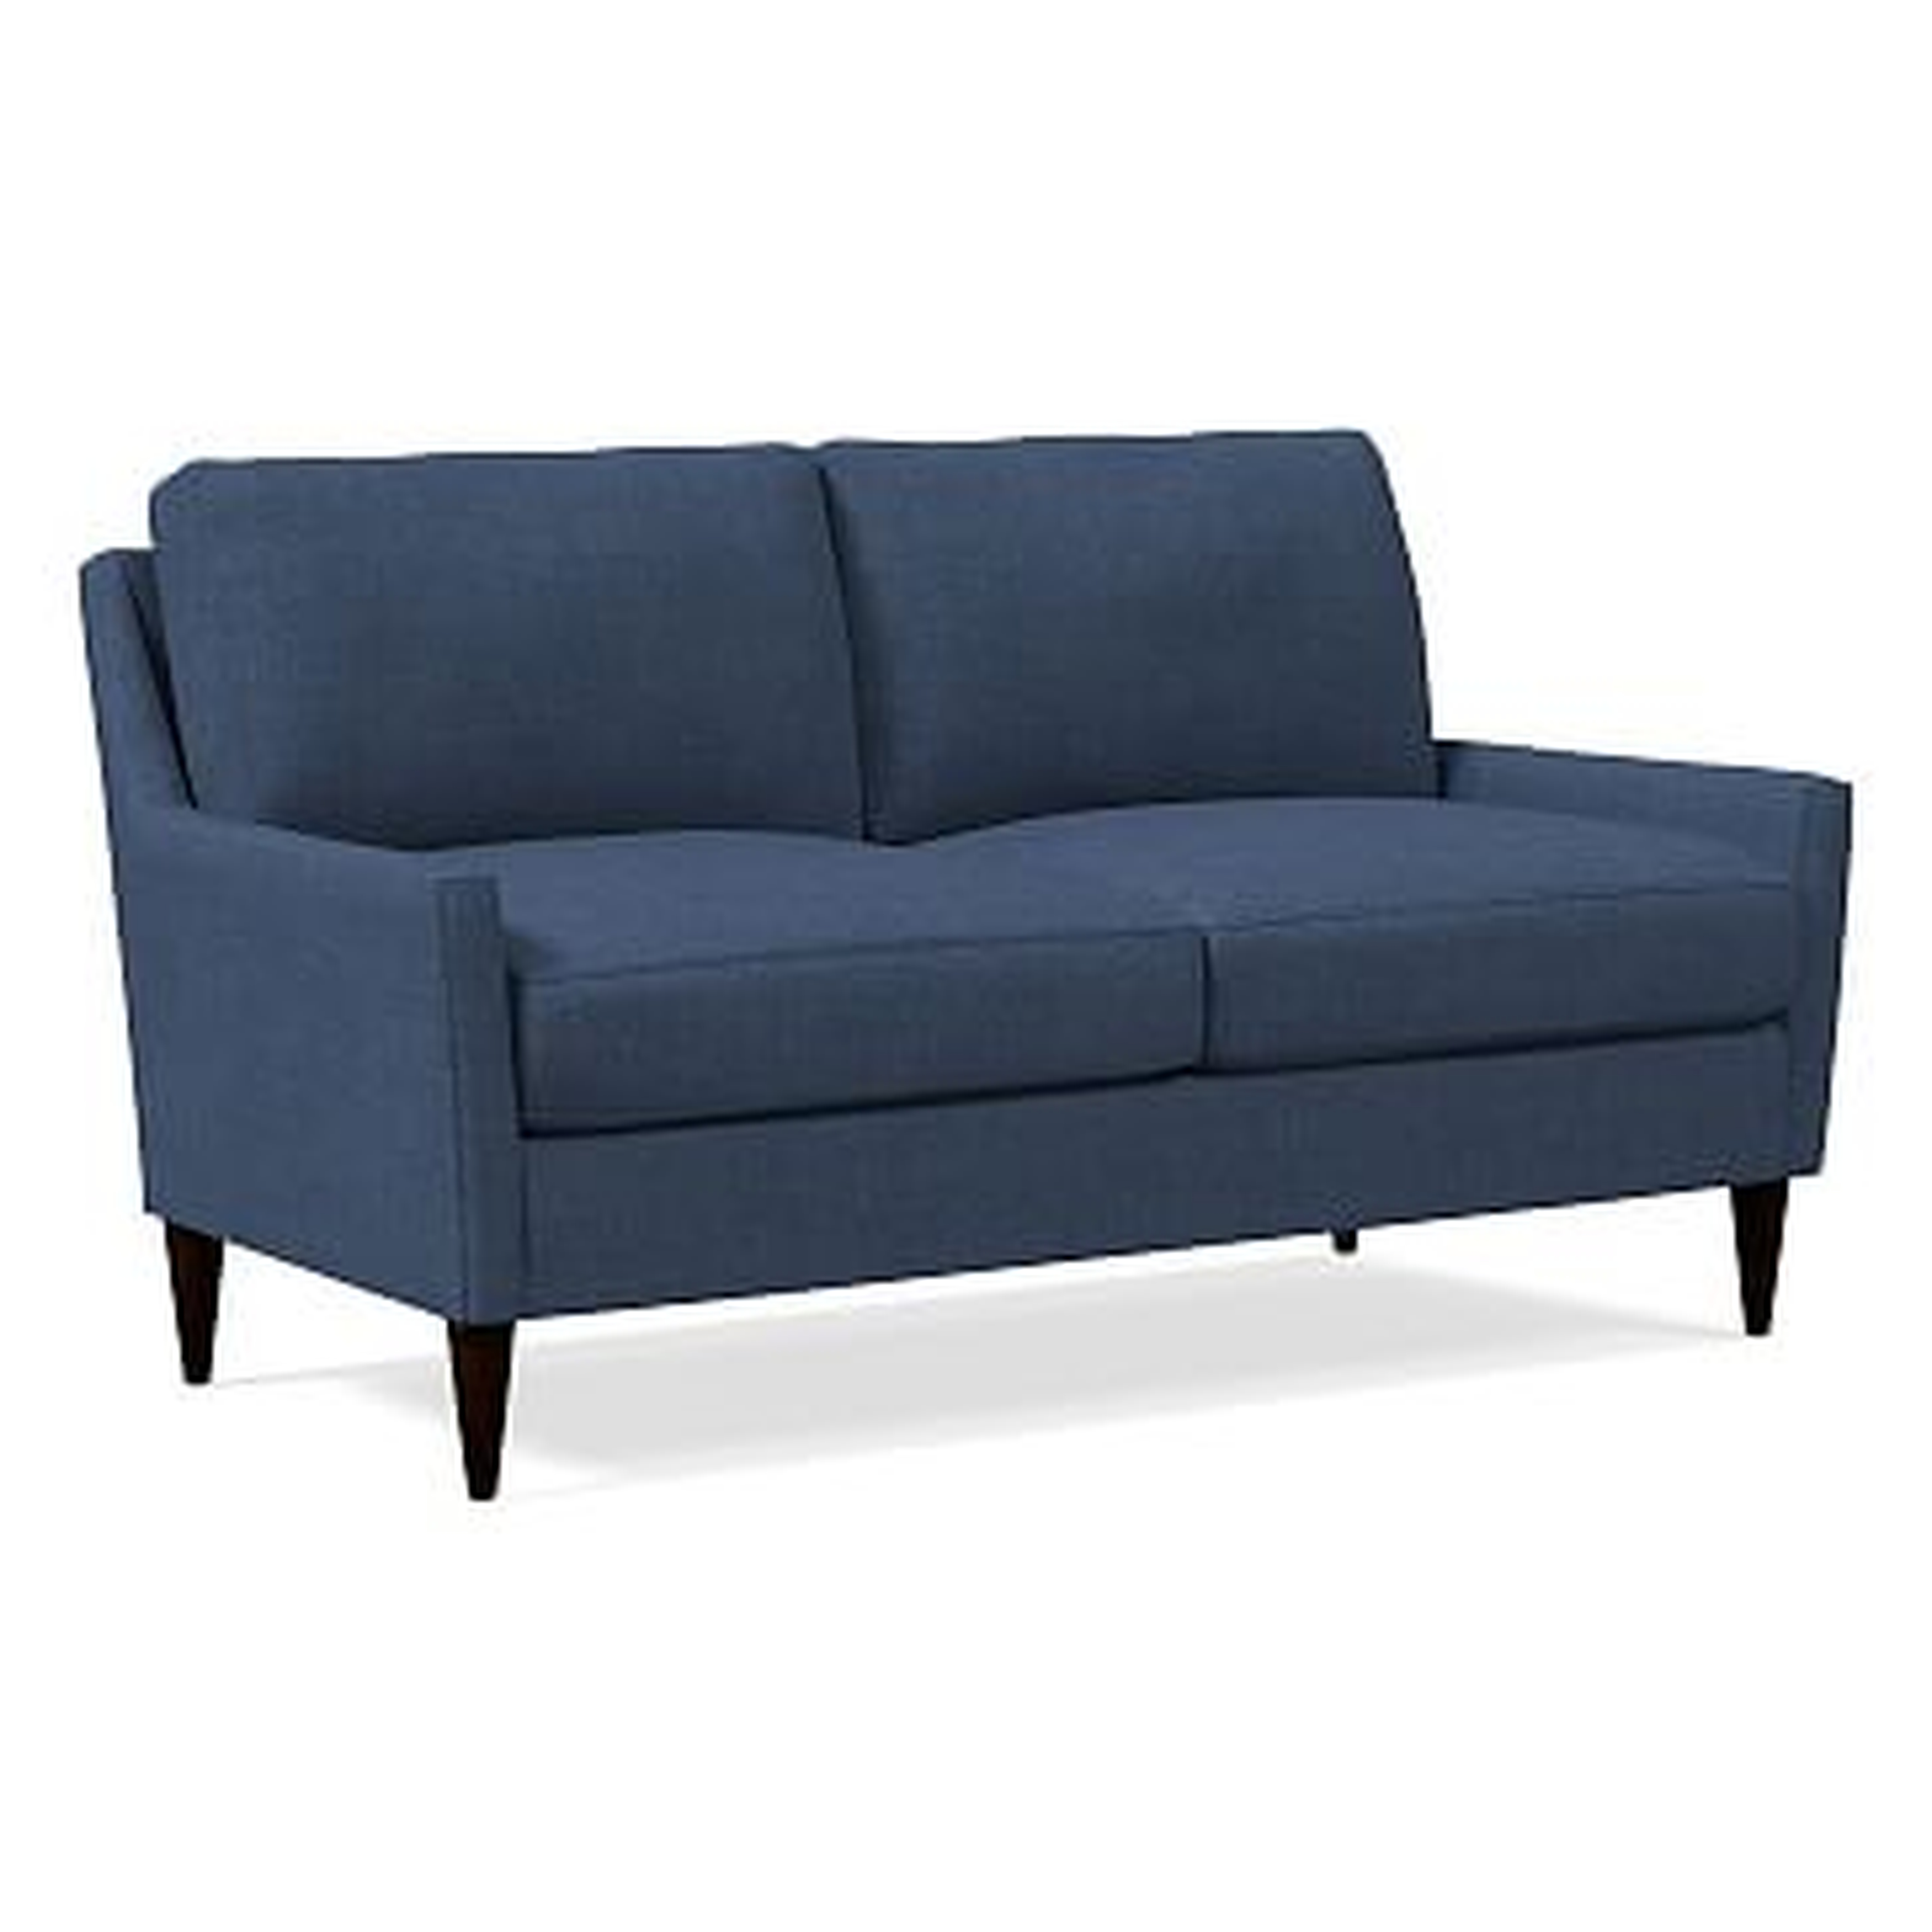 Everett 60" Loveseat, Performance Yarn Dyed Linen Weave, French Blue, Chocolate - West Elm